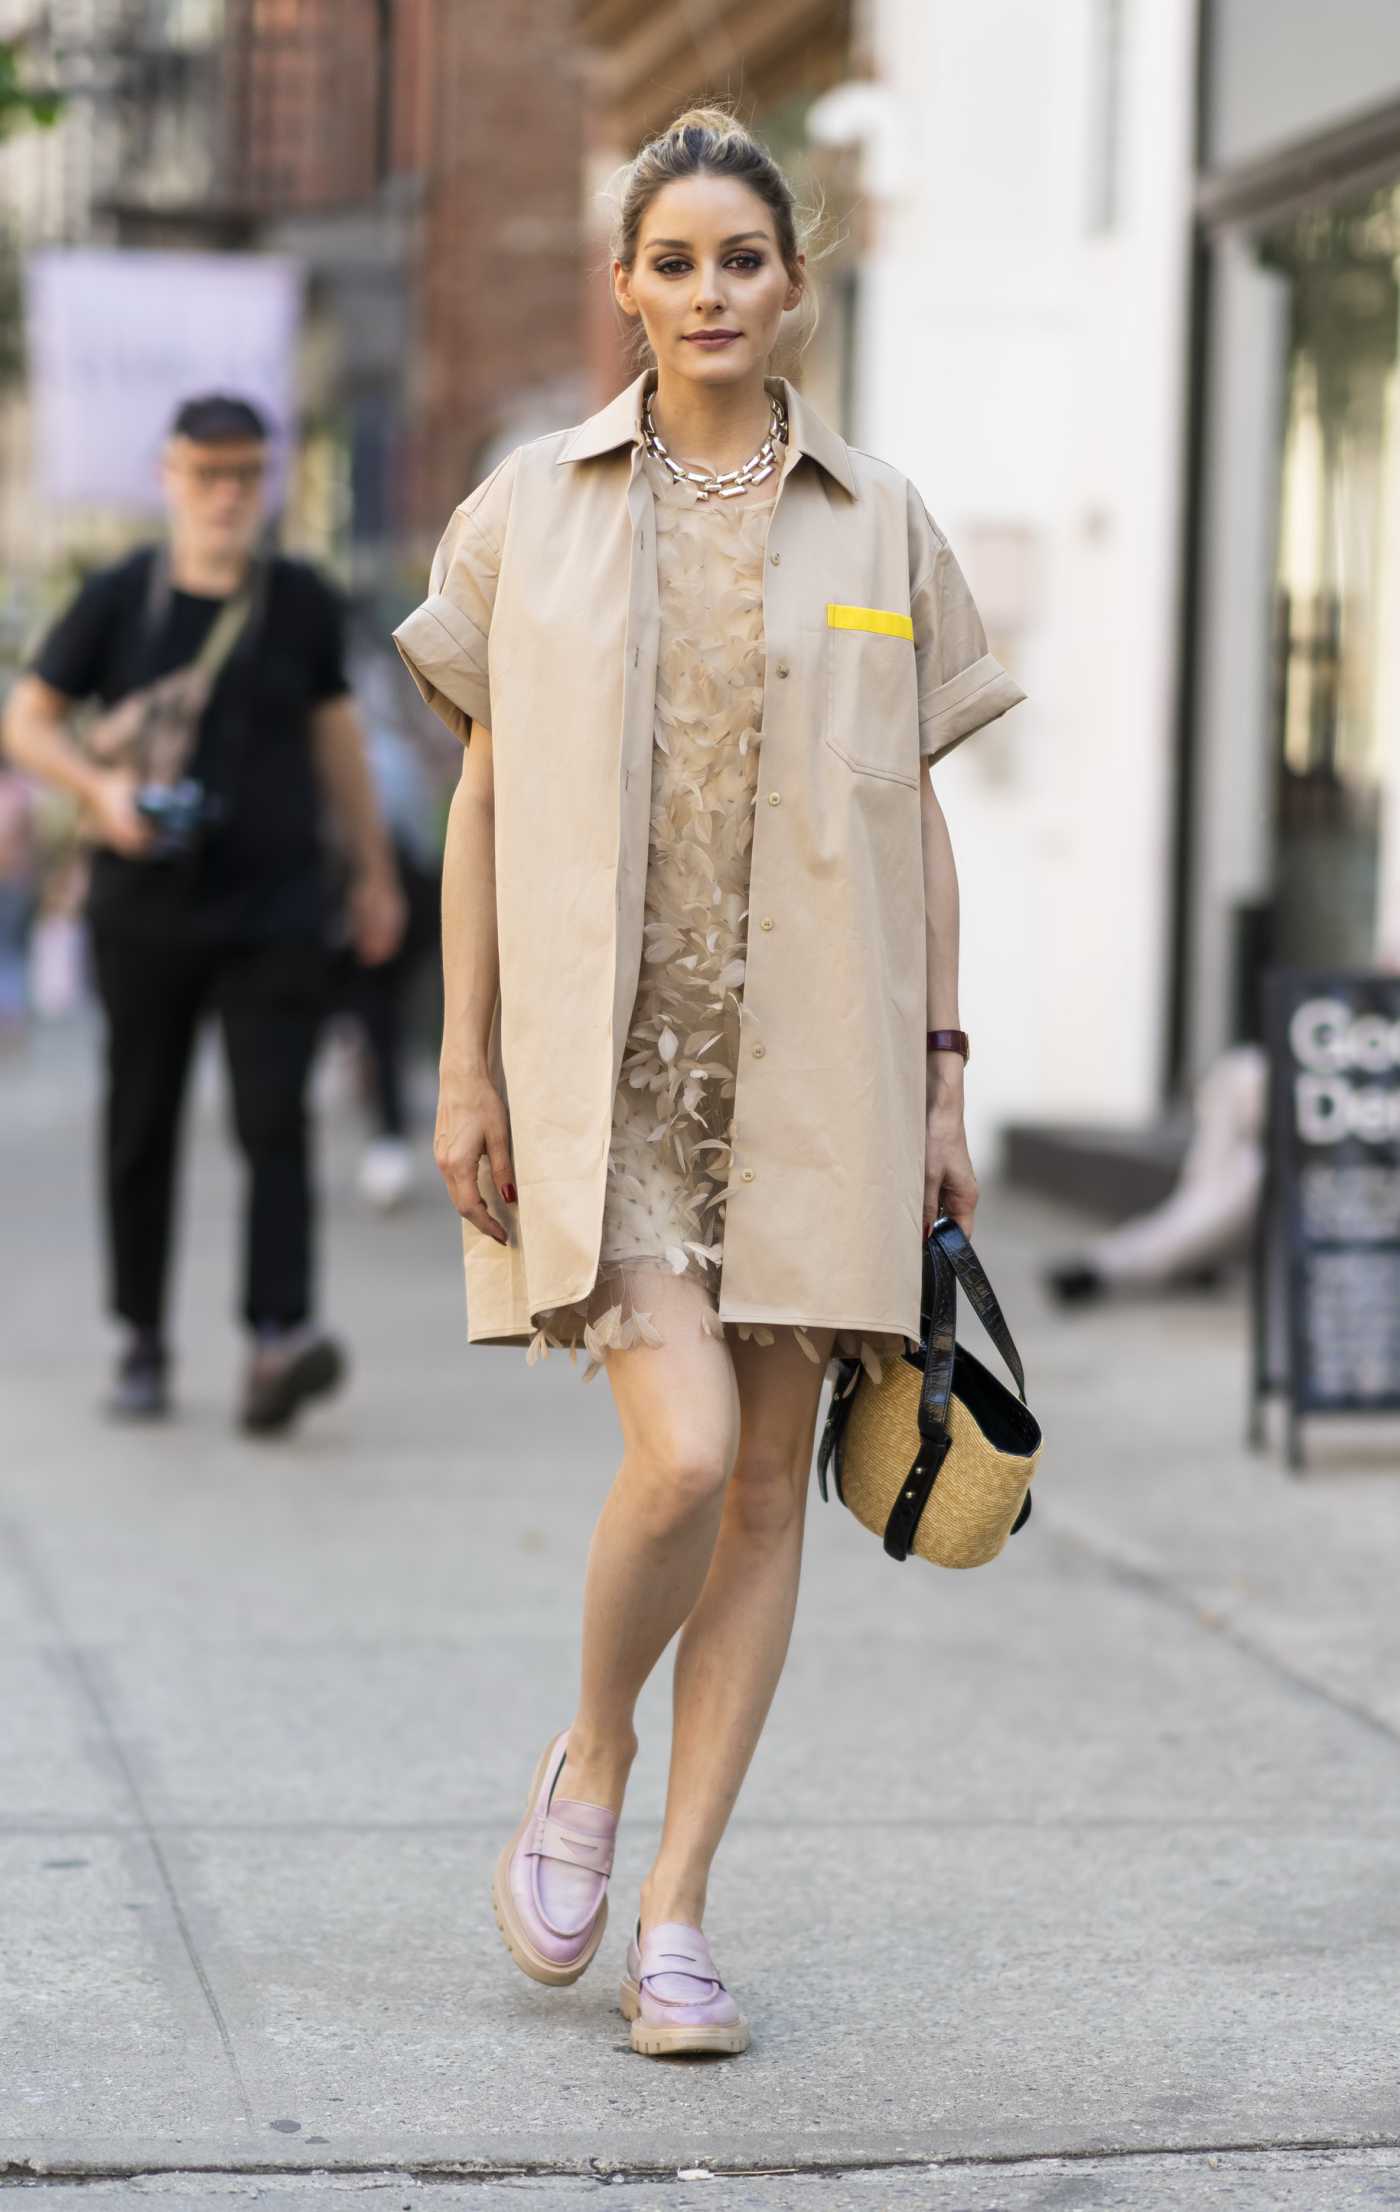 Olivia Palermo in a Beige Shirt Was Seen Out in New York 06/07/2022